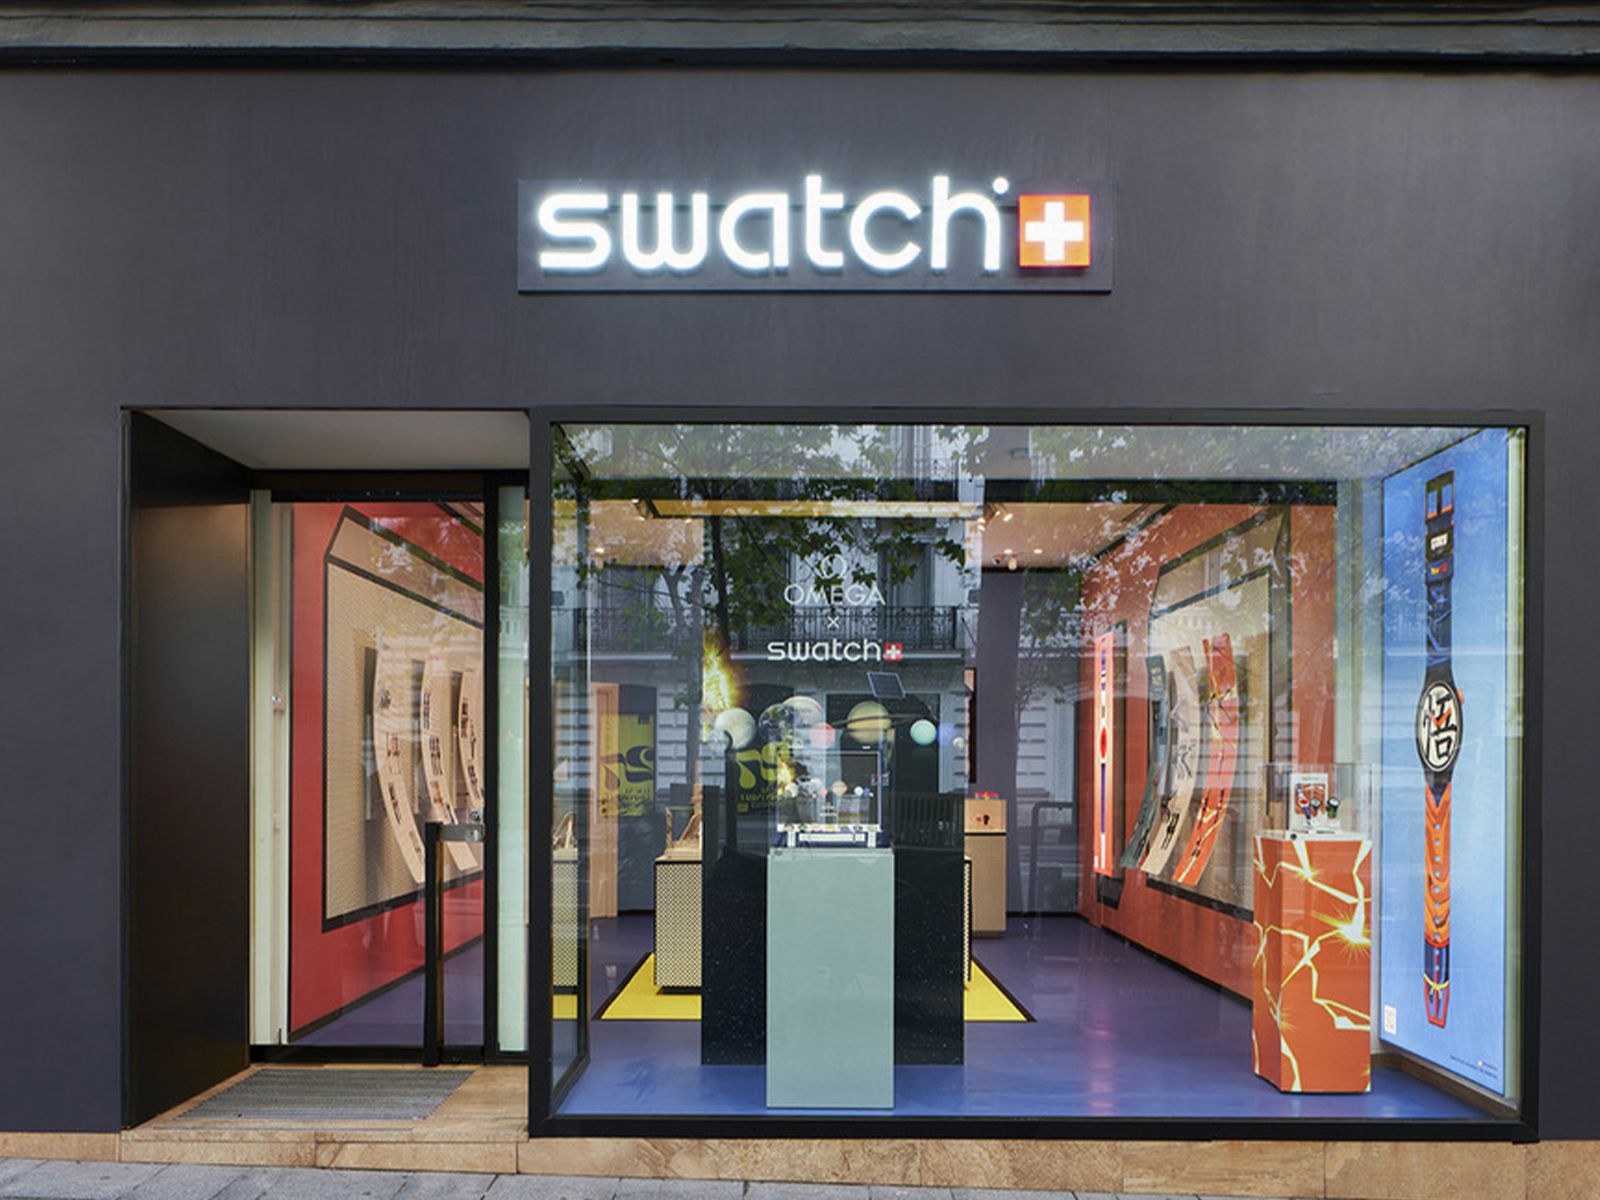 Swatch takes over Serrano Street with its new store